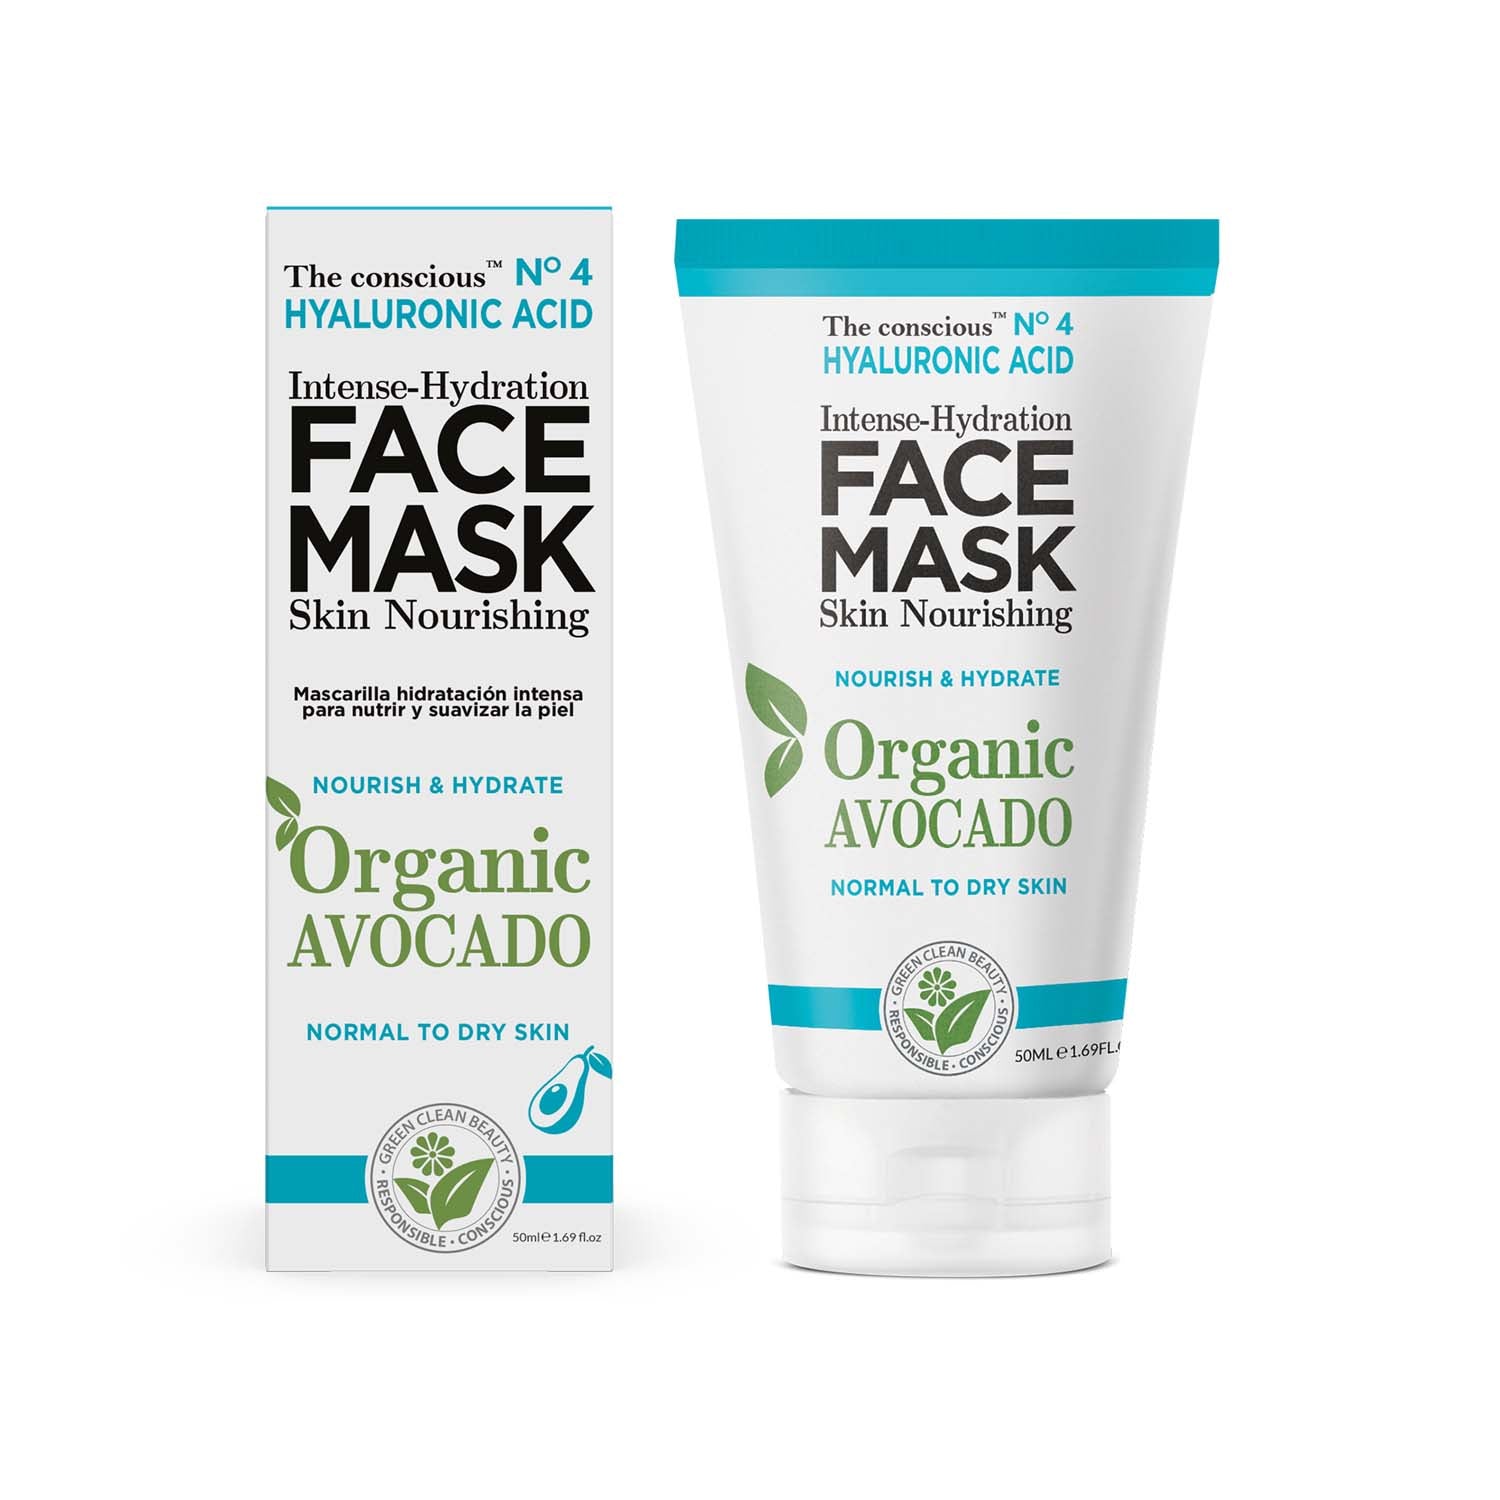 The conscious™ Hyaluronic Acid Intense-Hydration Face Mask Organic Avocado